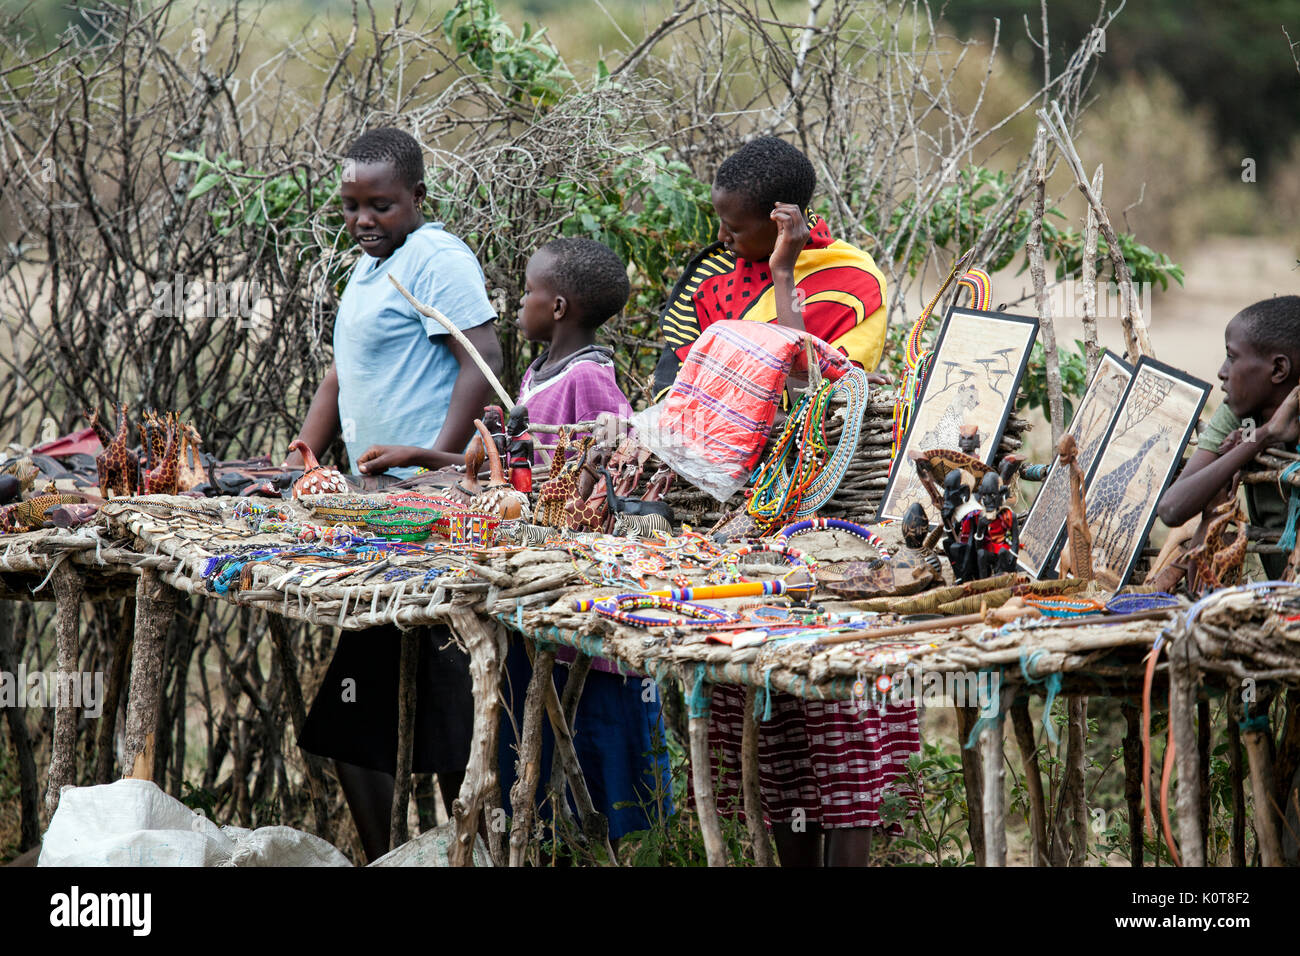 Small Masai village market lined with crafts goods, Kenya, Africa. Stock Photo